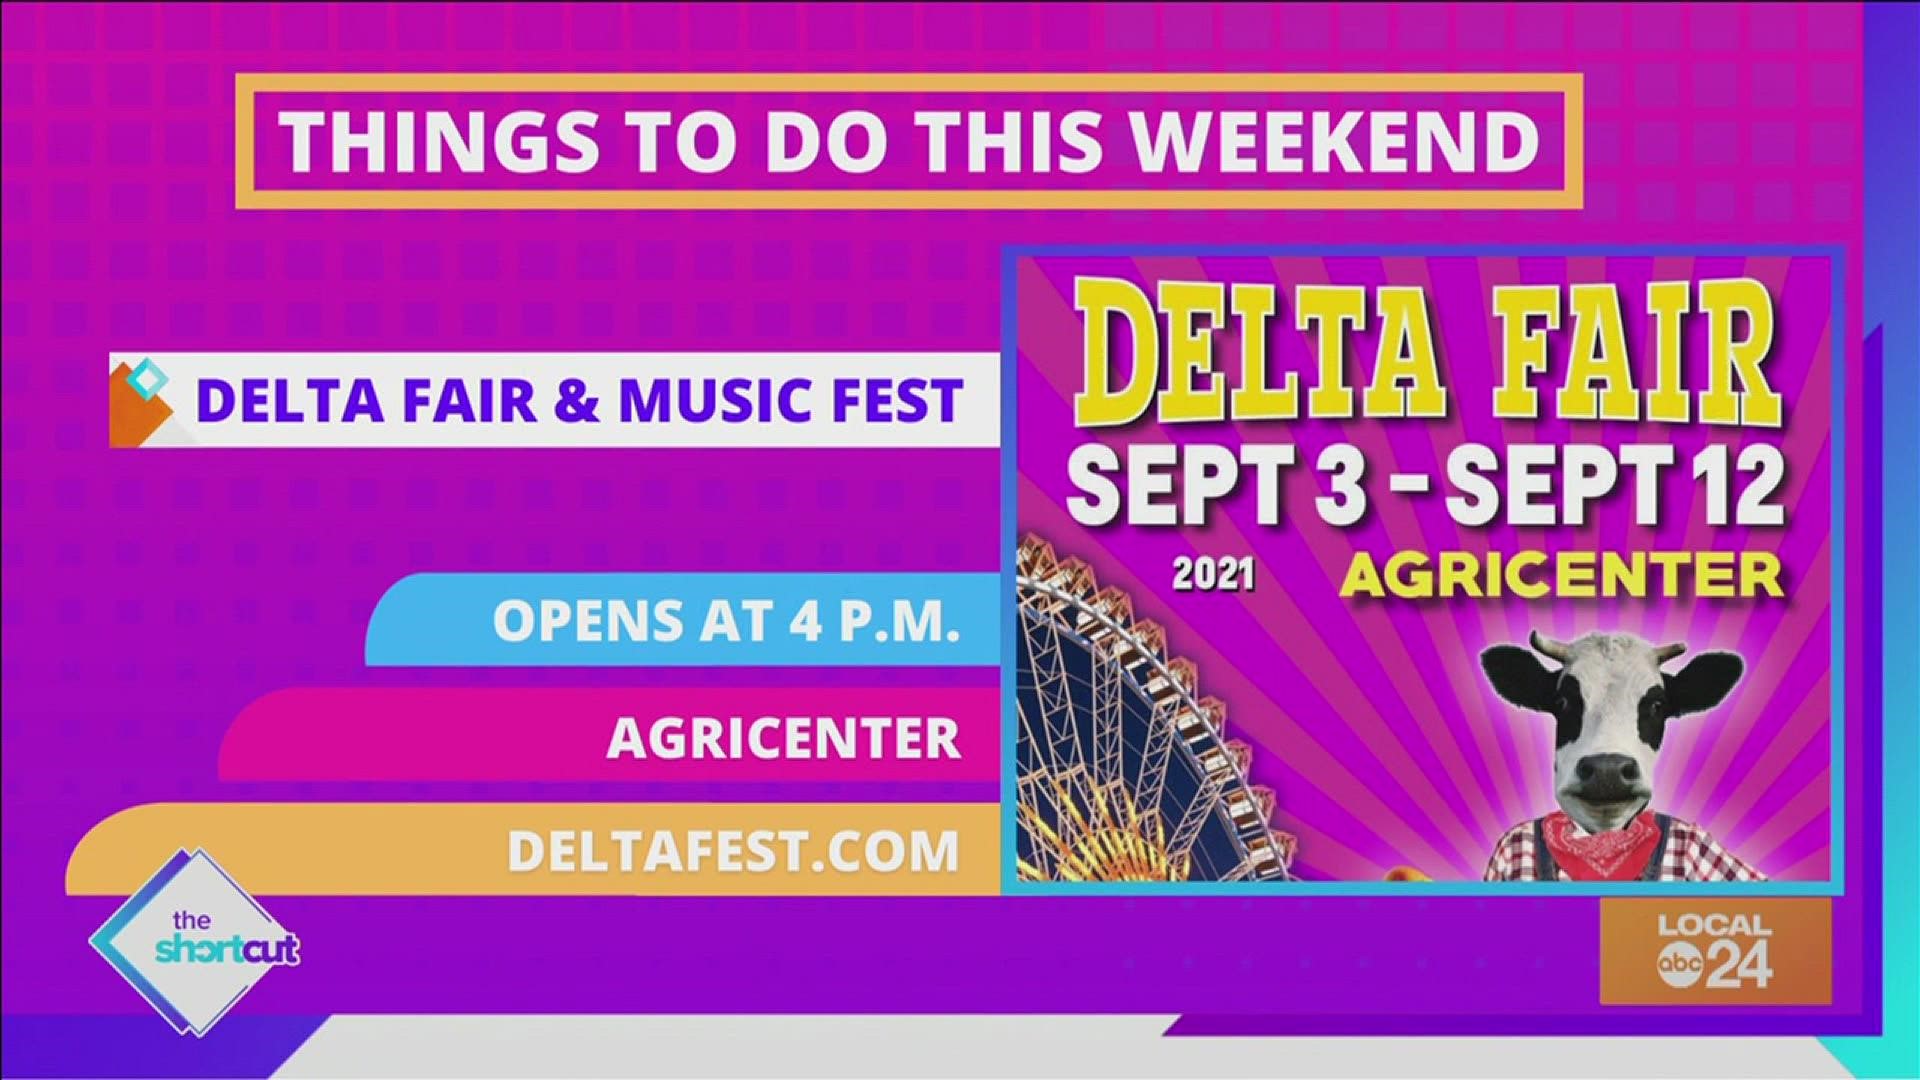 From the Delta Fair to the 901FC game, check out some of the fun events going on in Memphis during the first weekend of September 2021!